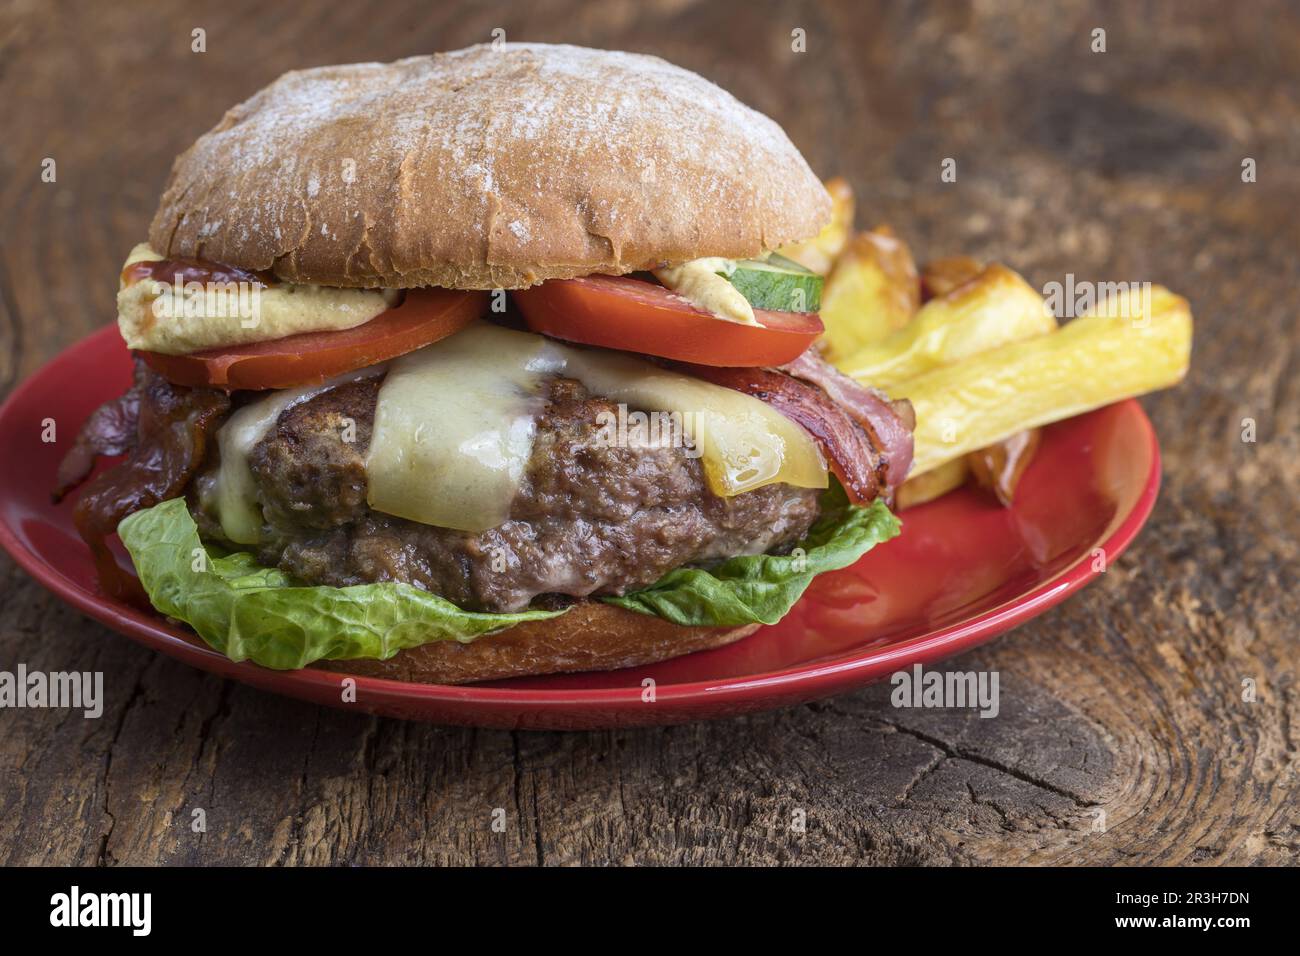 Cheeseburger with fries on wood Stock Photo